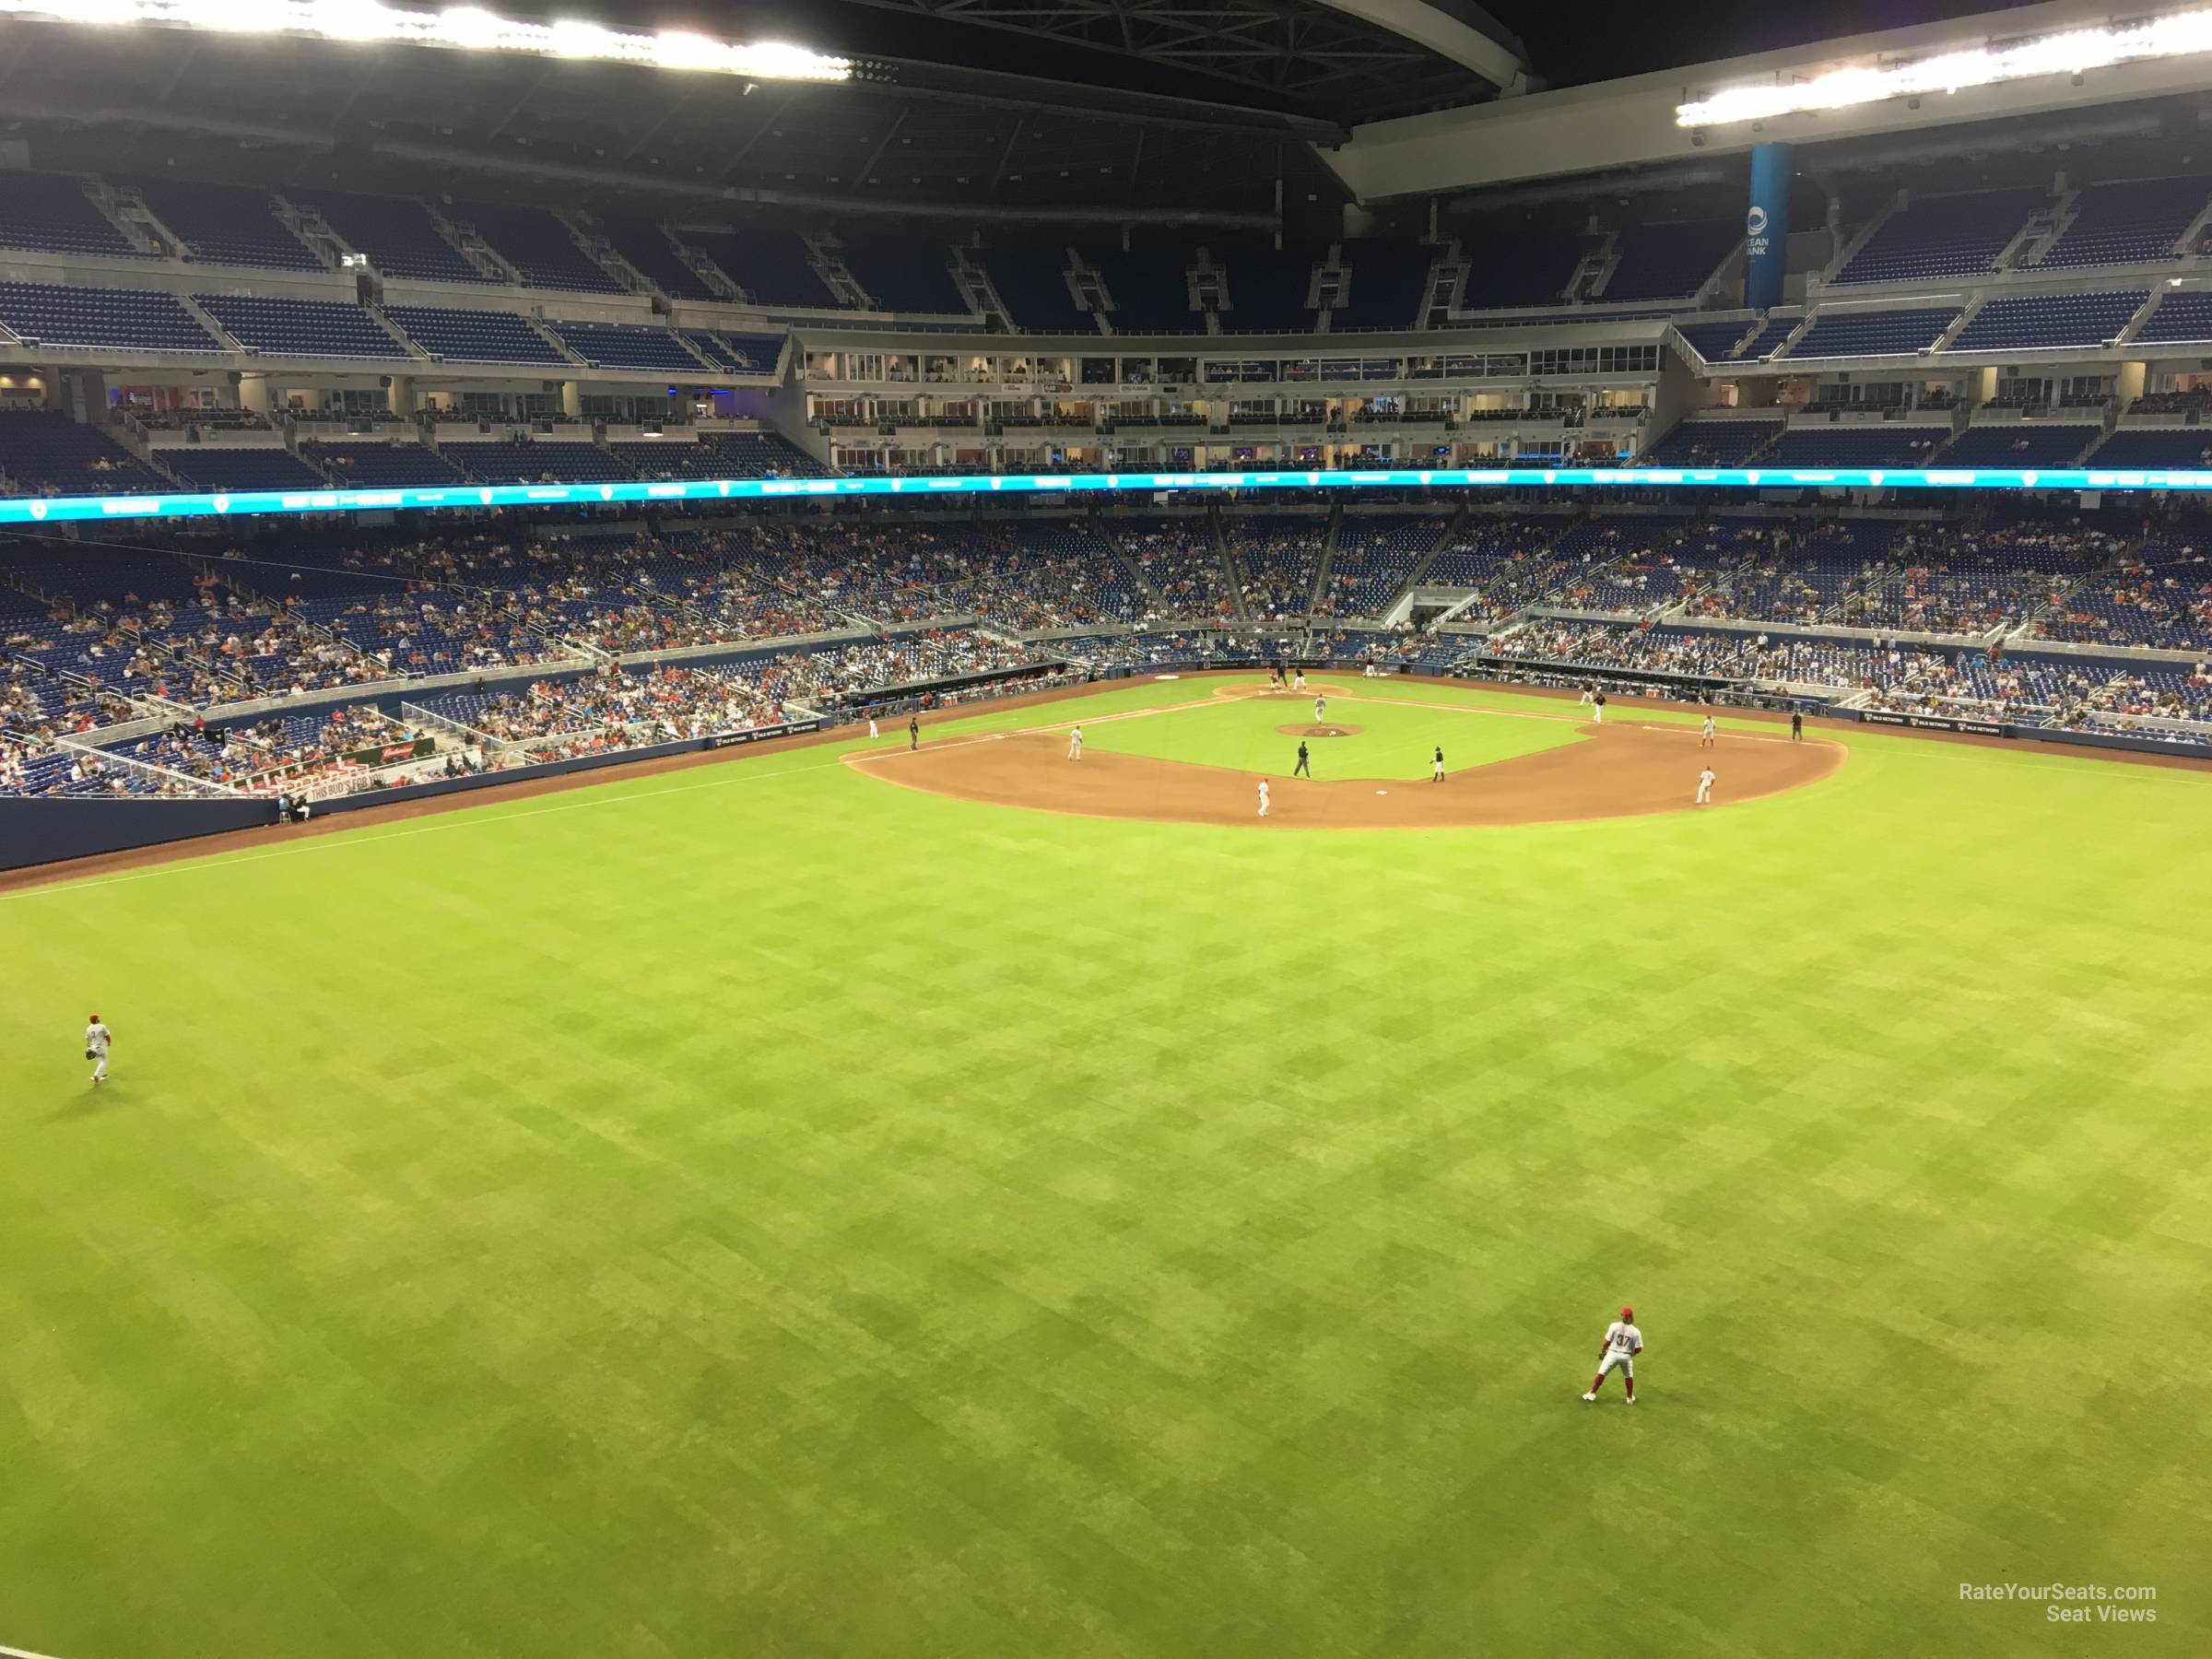 Miami Marlins - Your beautiful loanDepot Park in 360.